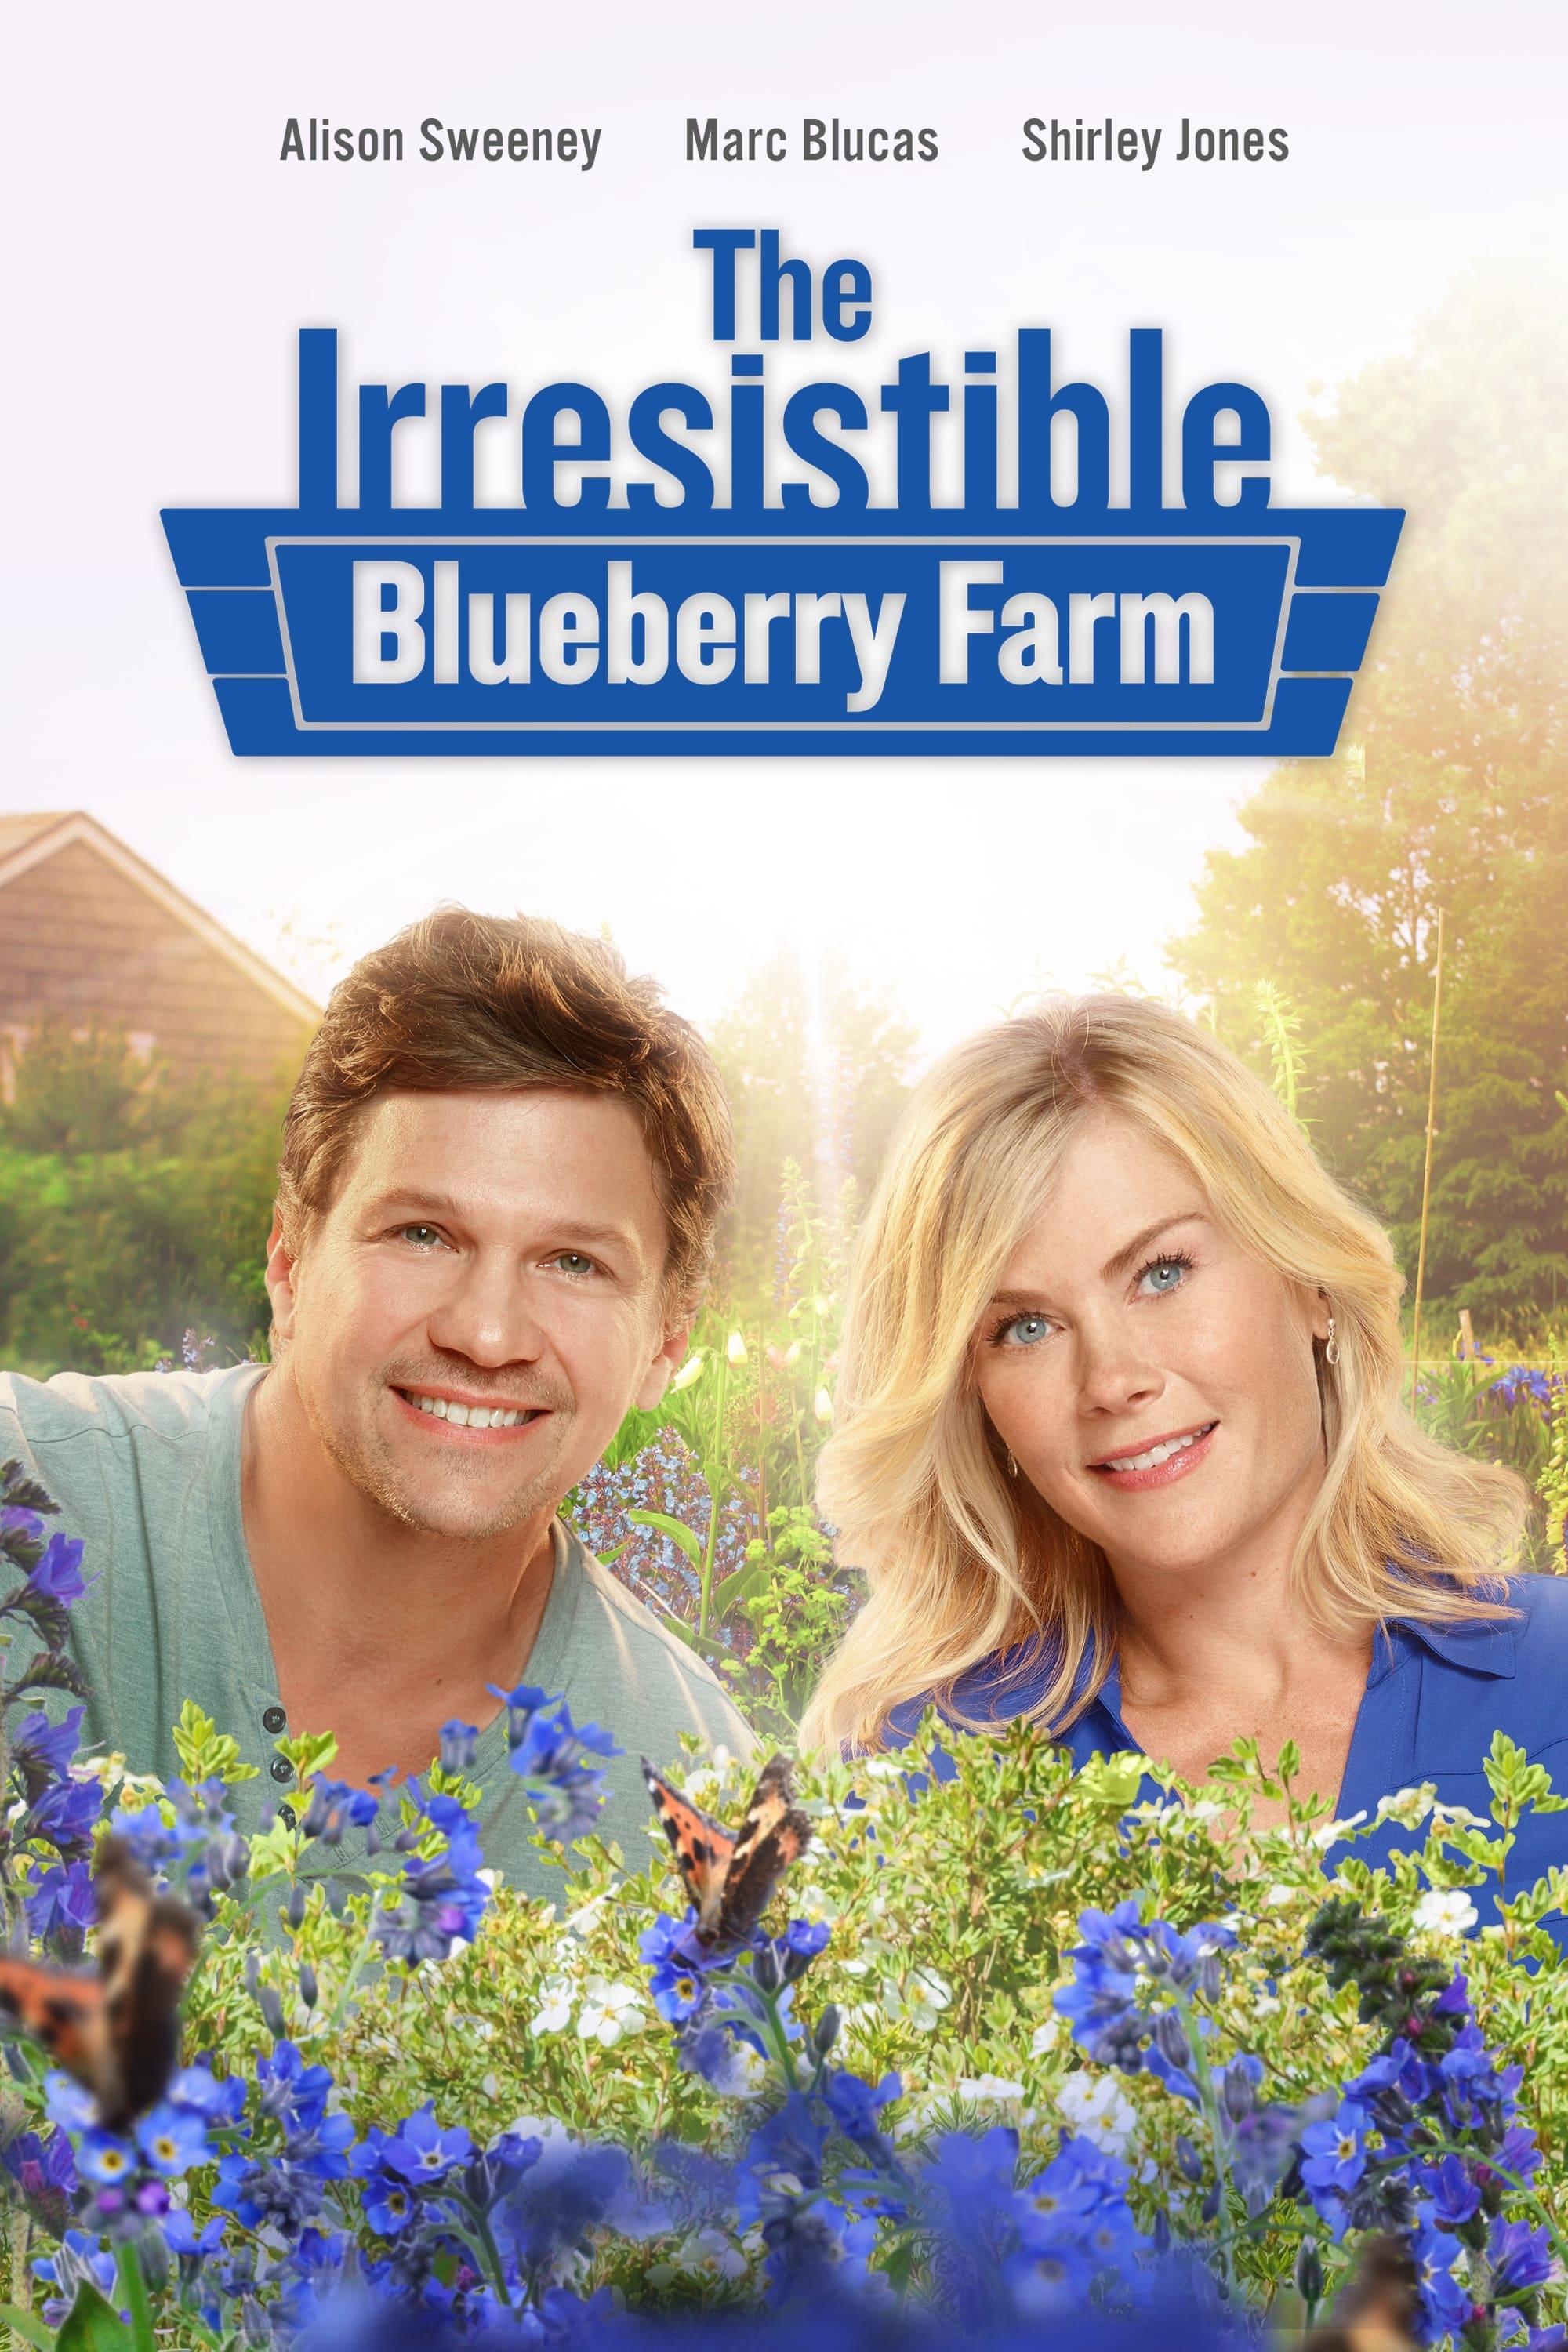 The Irresistible Blueberry Farm poster